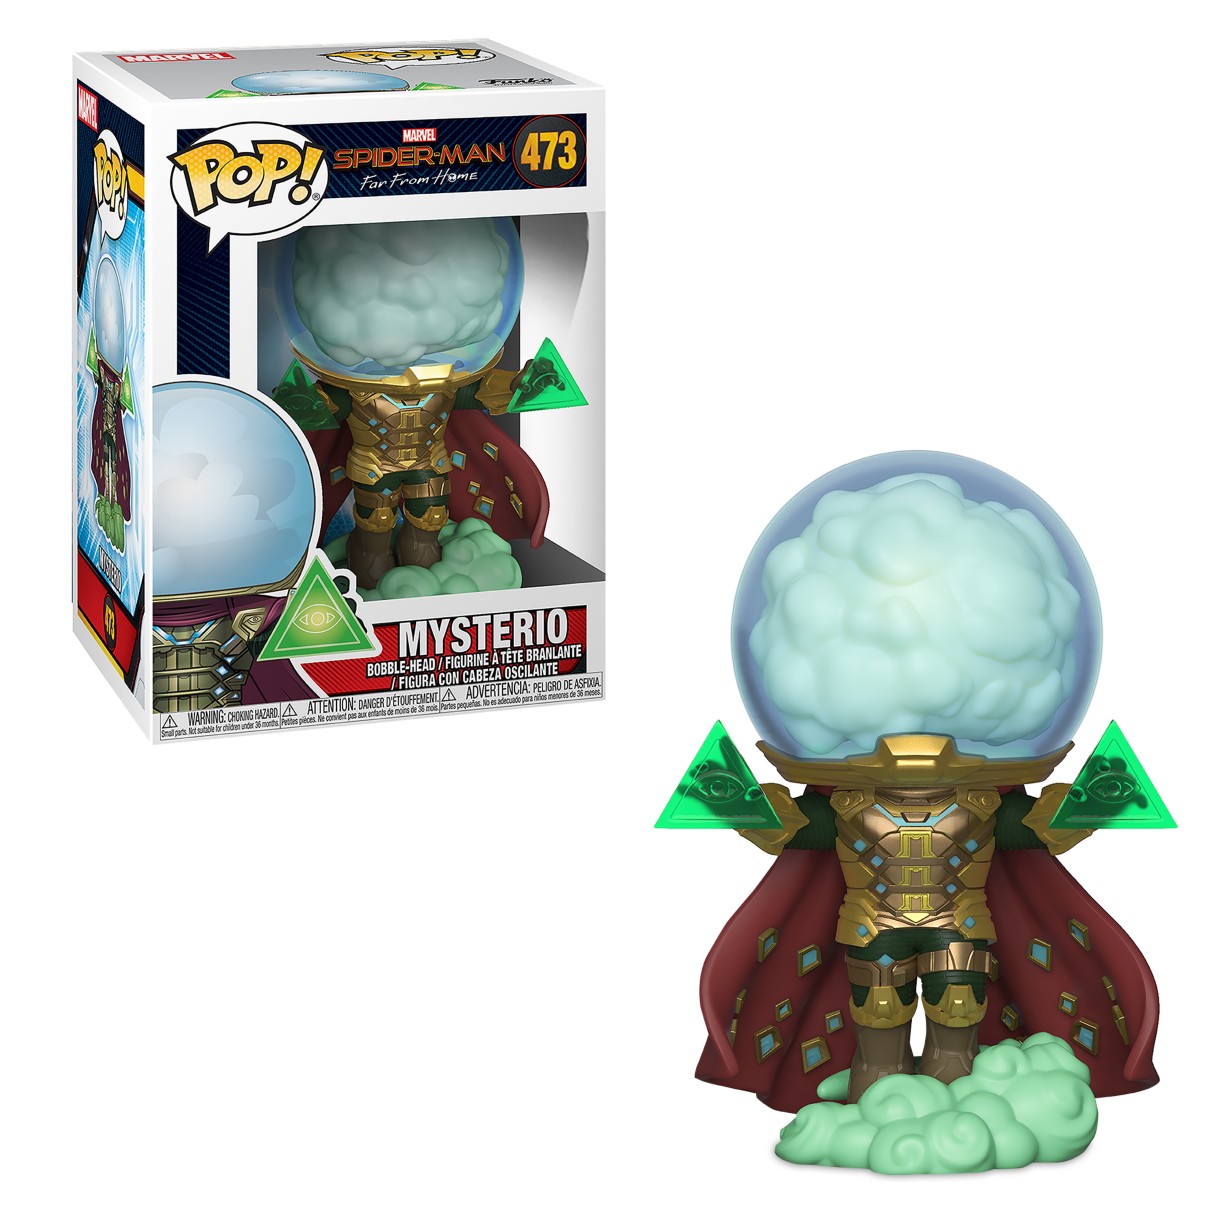 Mysterio Pop! Vinyl Figure by Funko – Spider-Man: Far from Home